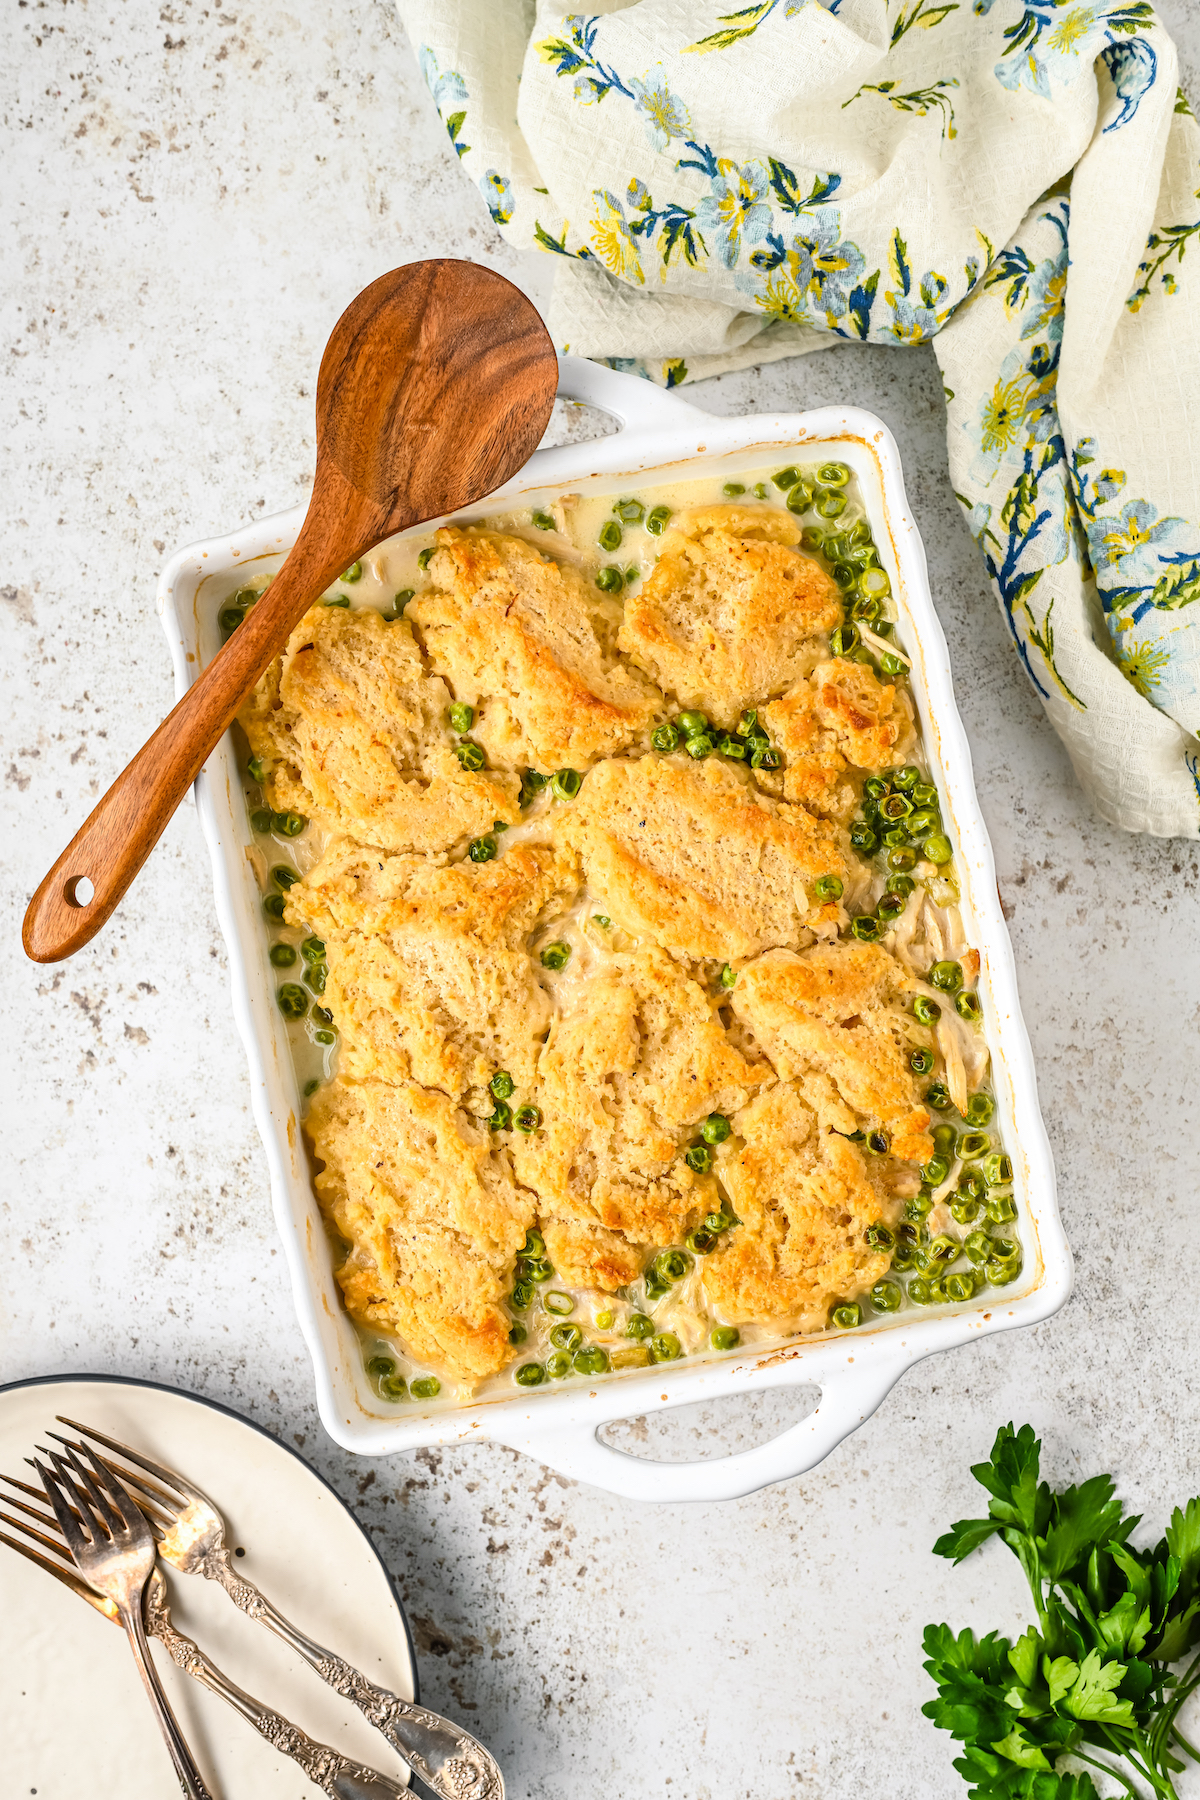 Baked chicken and dumplings casserole with peas.